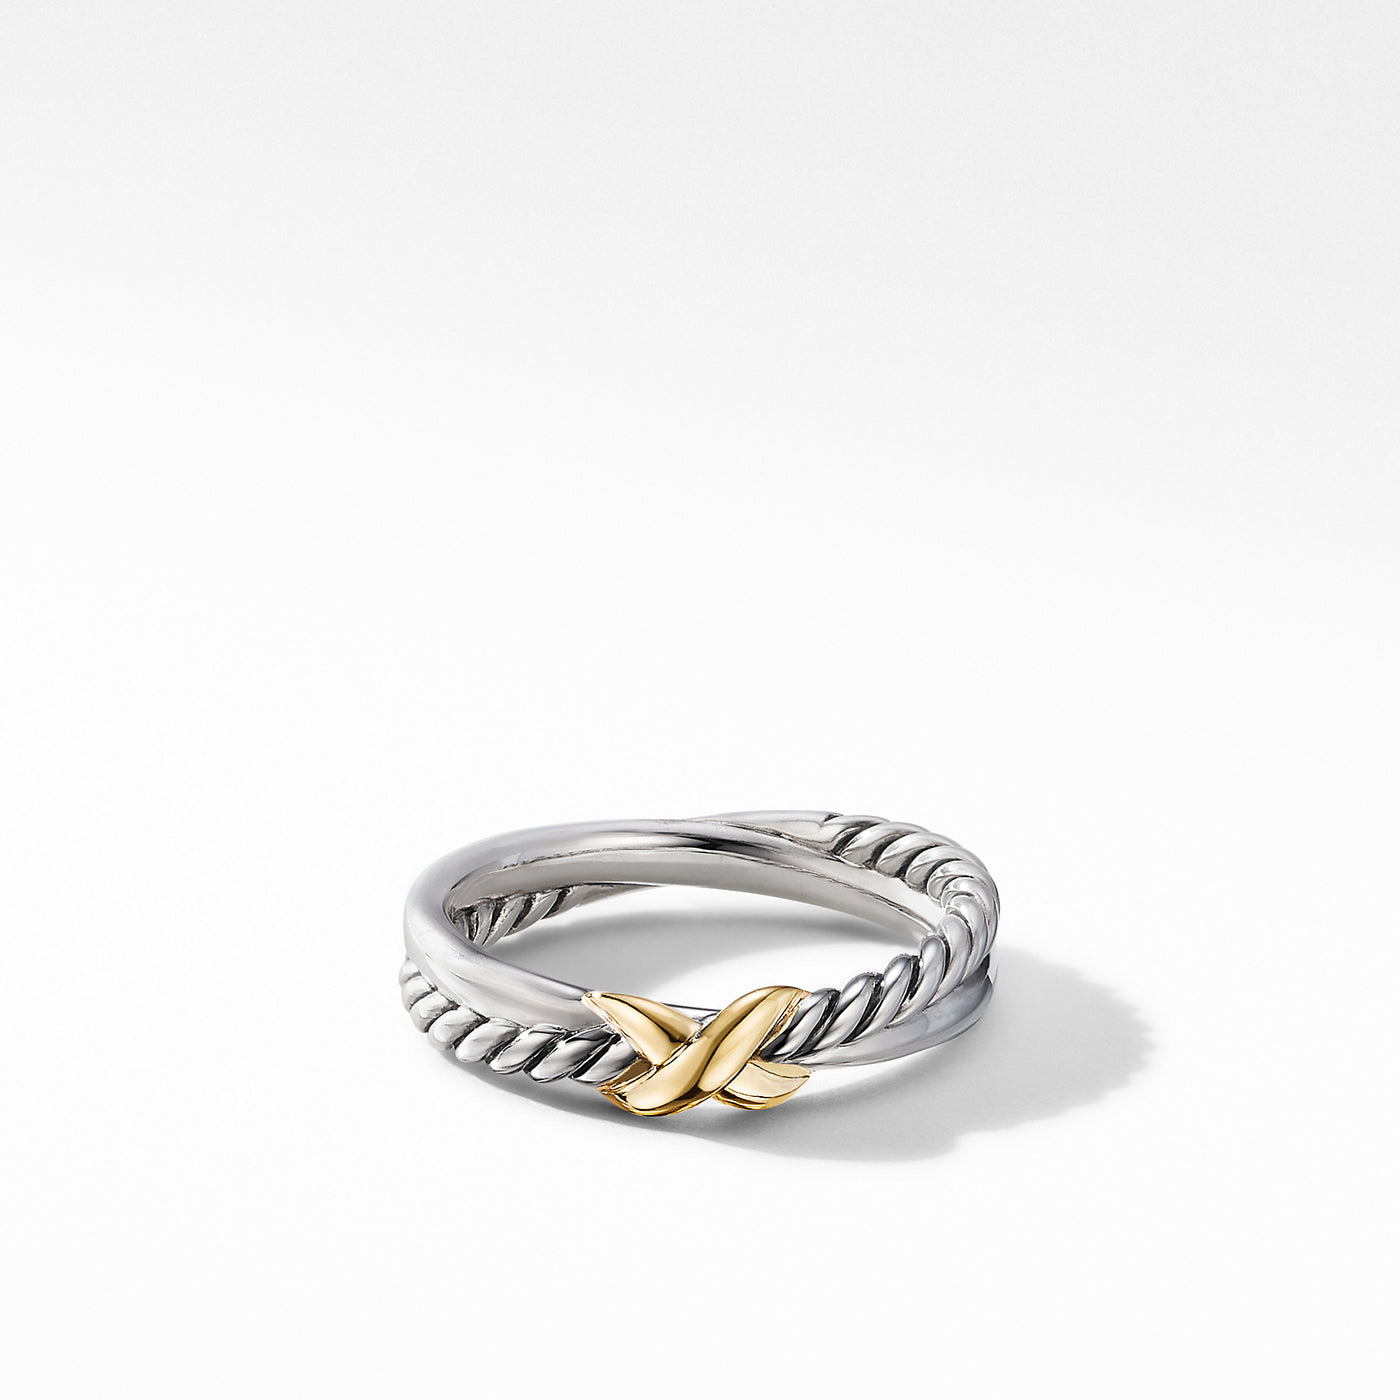 Petite X Ring in Sterling Silver with 18K Yellow Gold\, 4mm